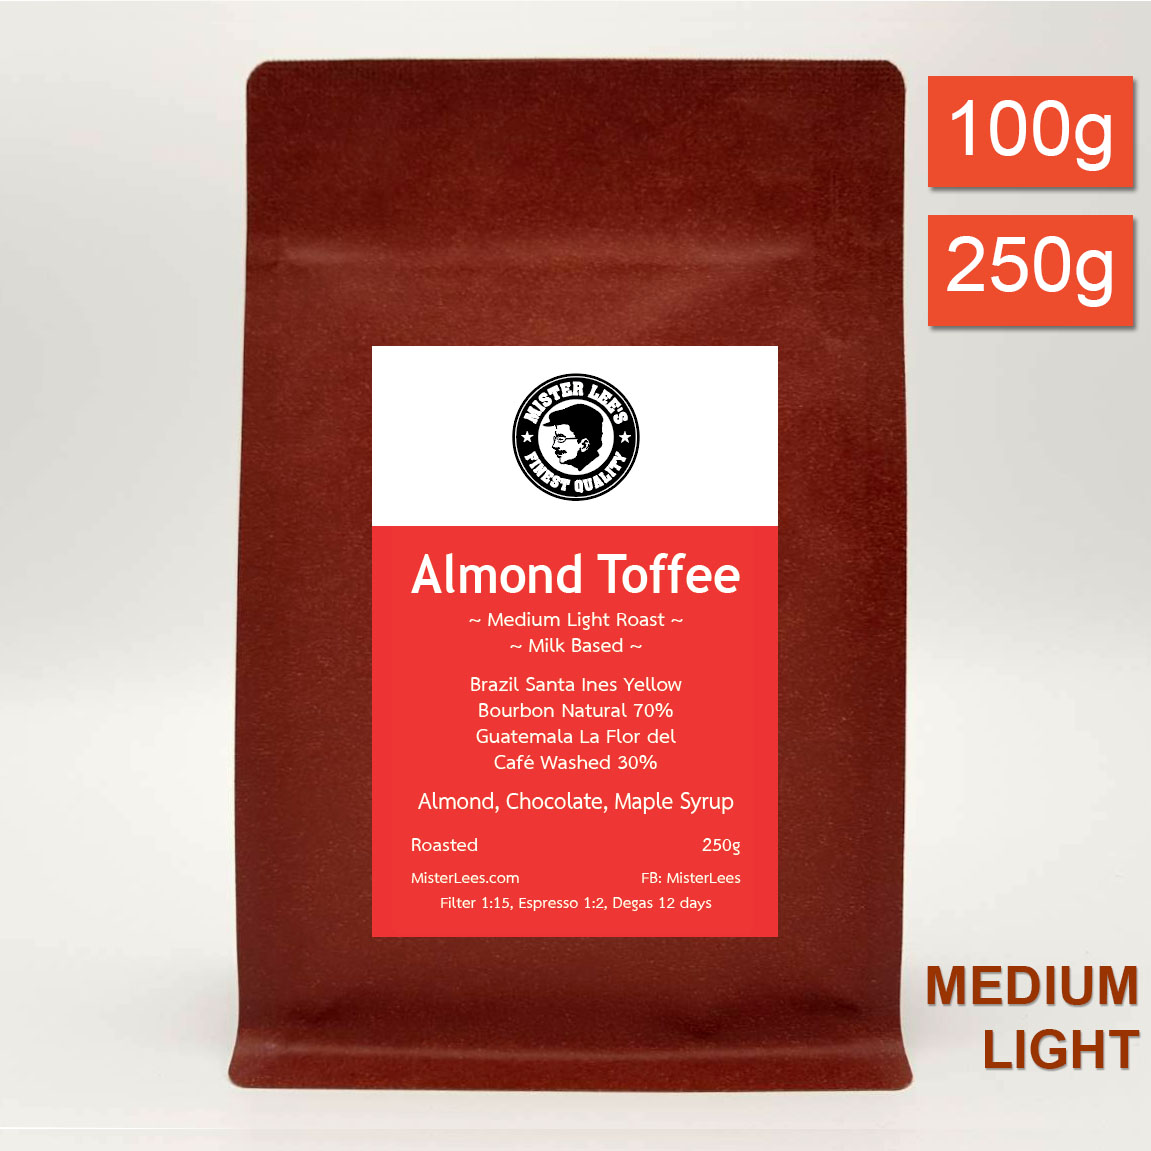 Almond Toffee Blend Color Red EF3734